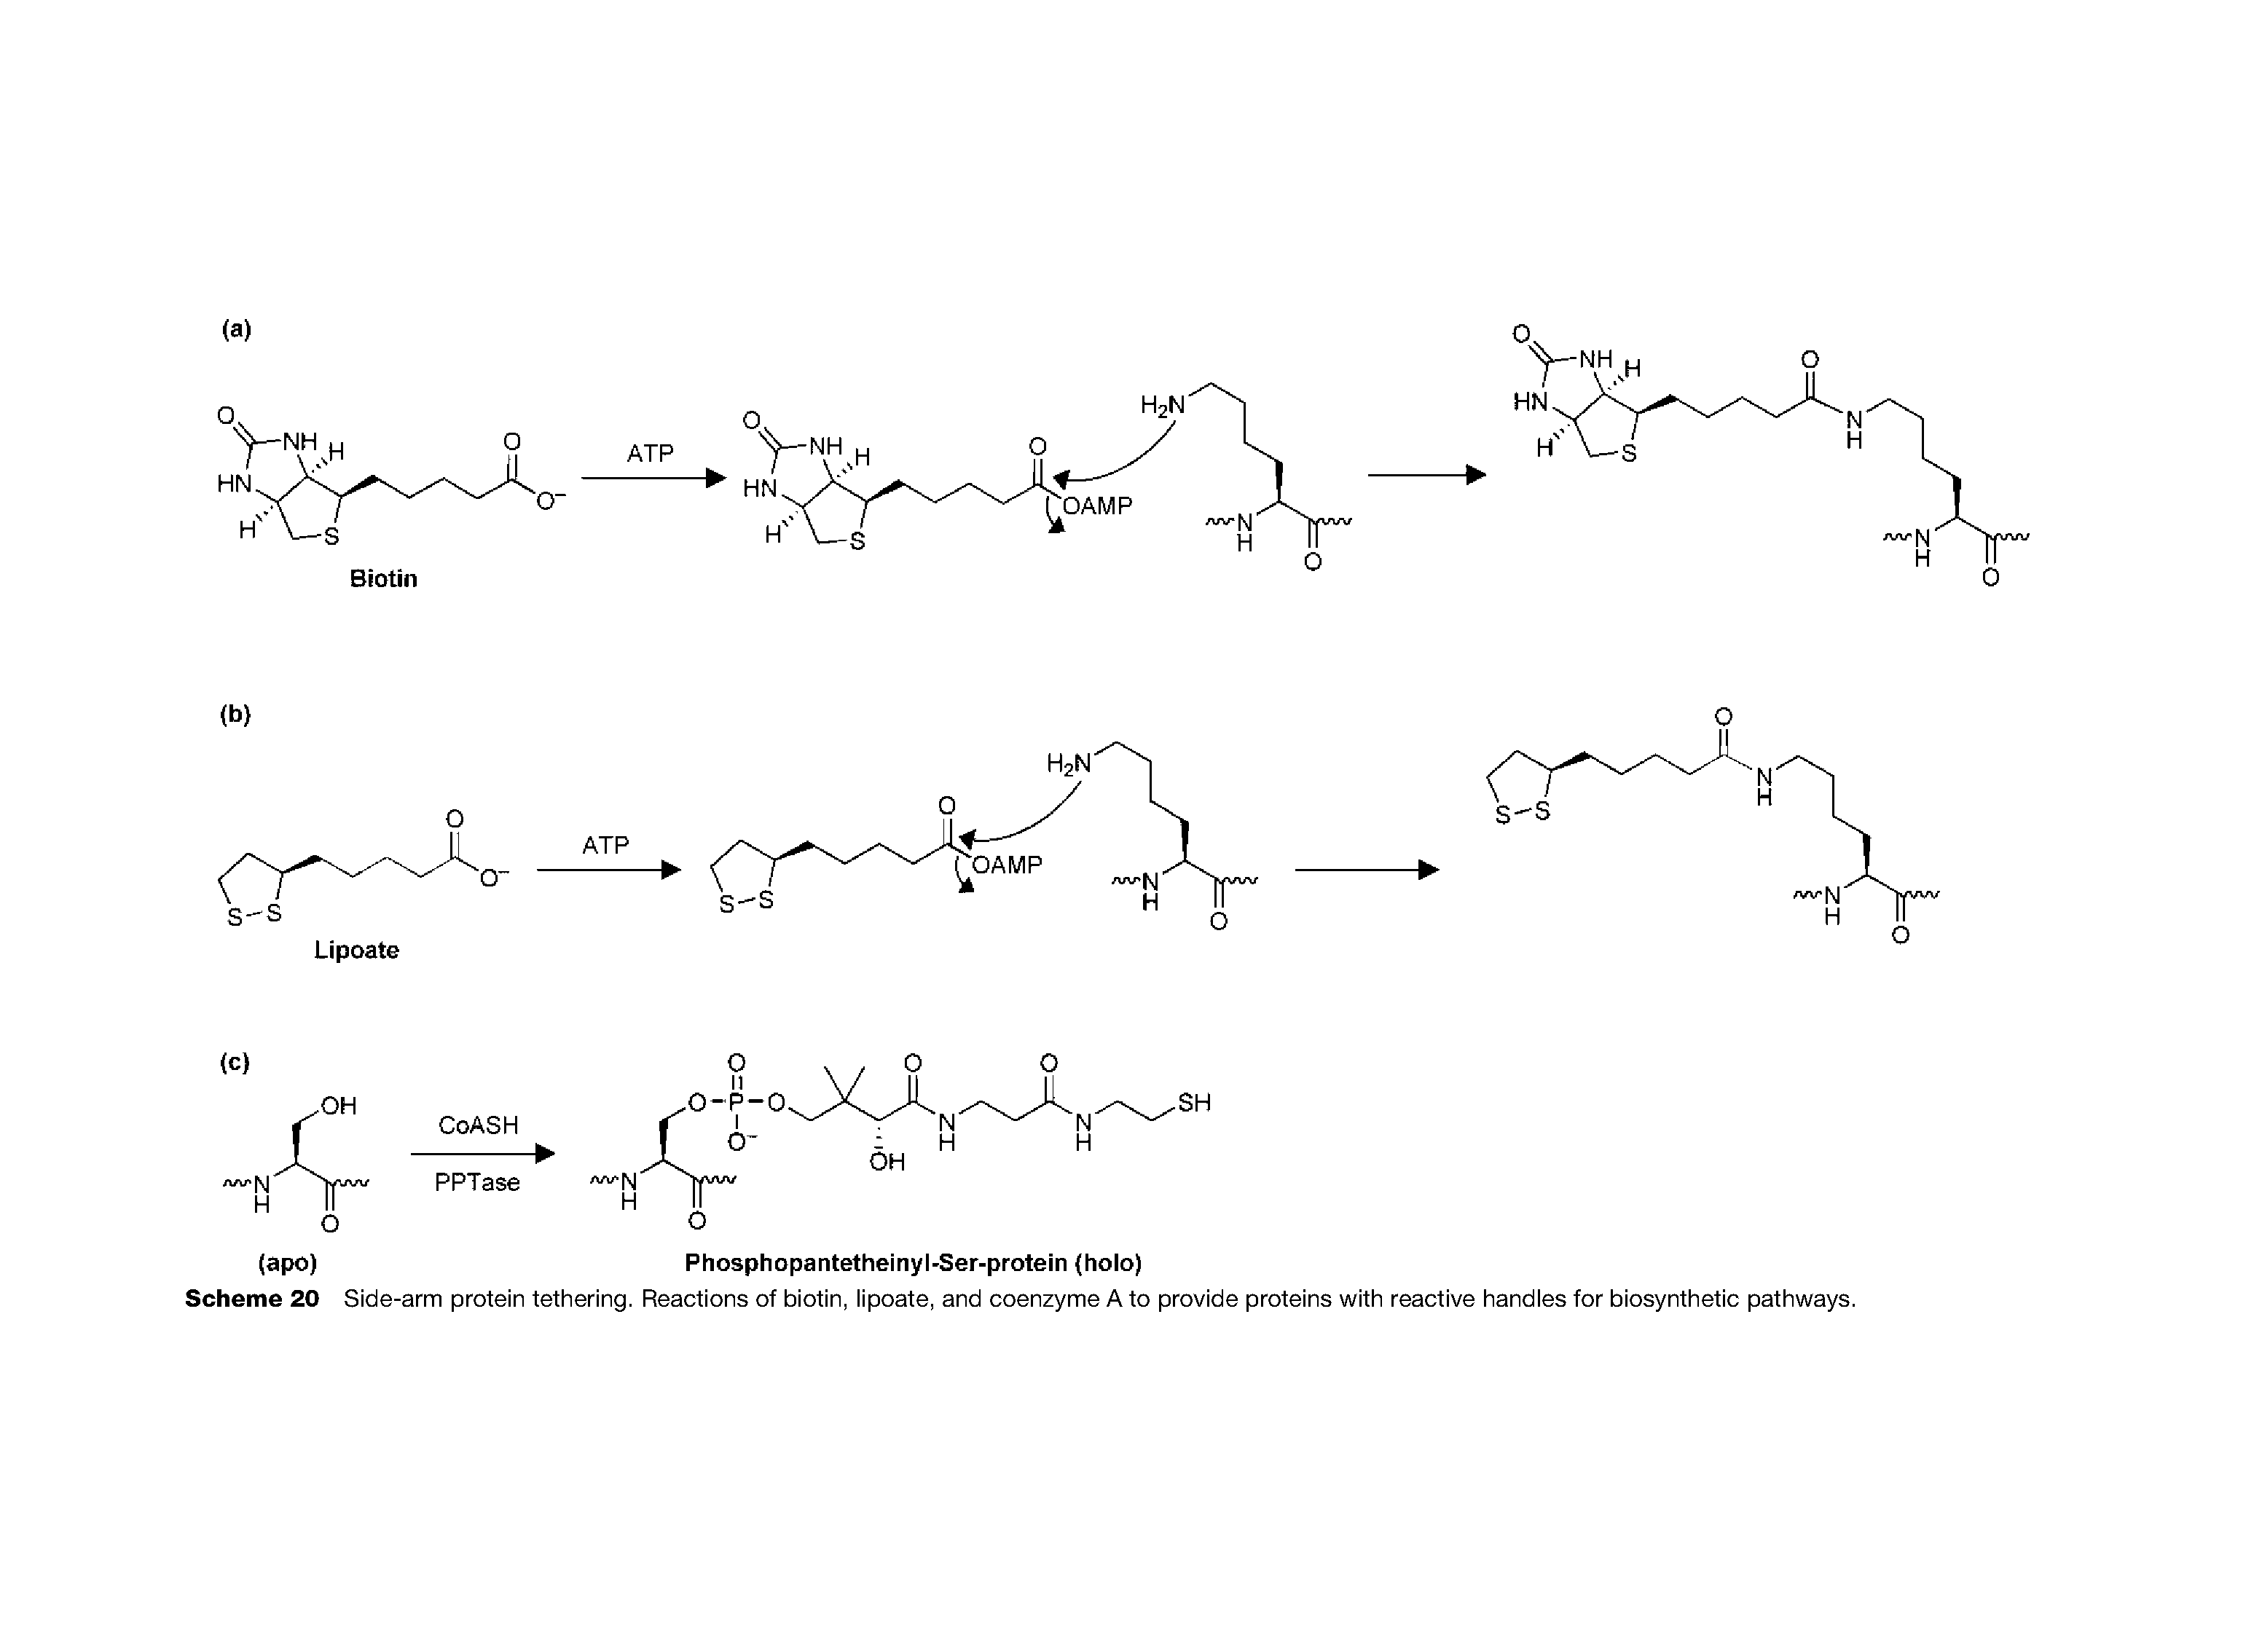 Scheme 20 Side-arm protein tethering. Reactions of biotin, iipoate, and coenzyme A to provide proteins with reactive handies for biosynthetic pathways.